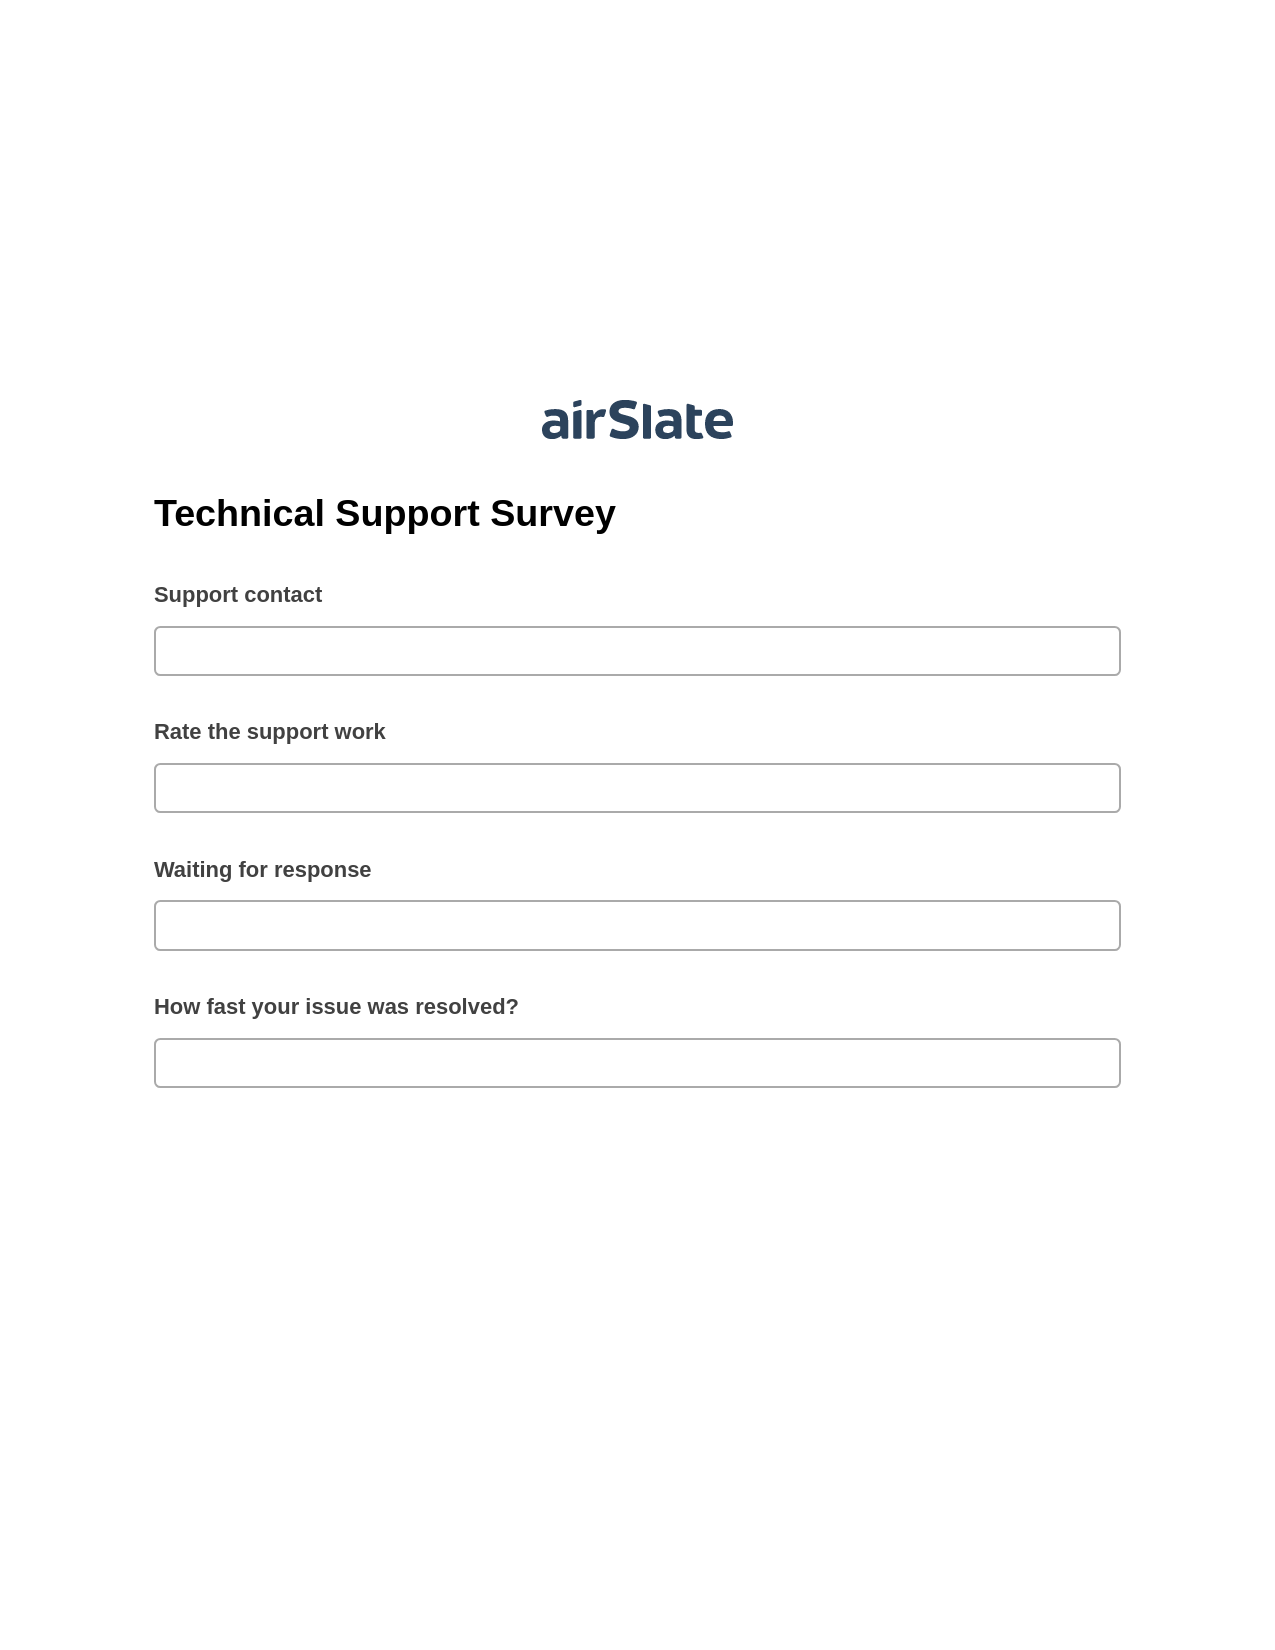 Technical Support Survey Pre-fill Dropdowns from Excel Bot, Custom Field's Value Bot, Export to WebMerge Bot